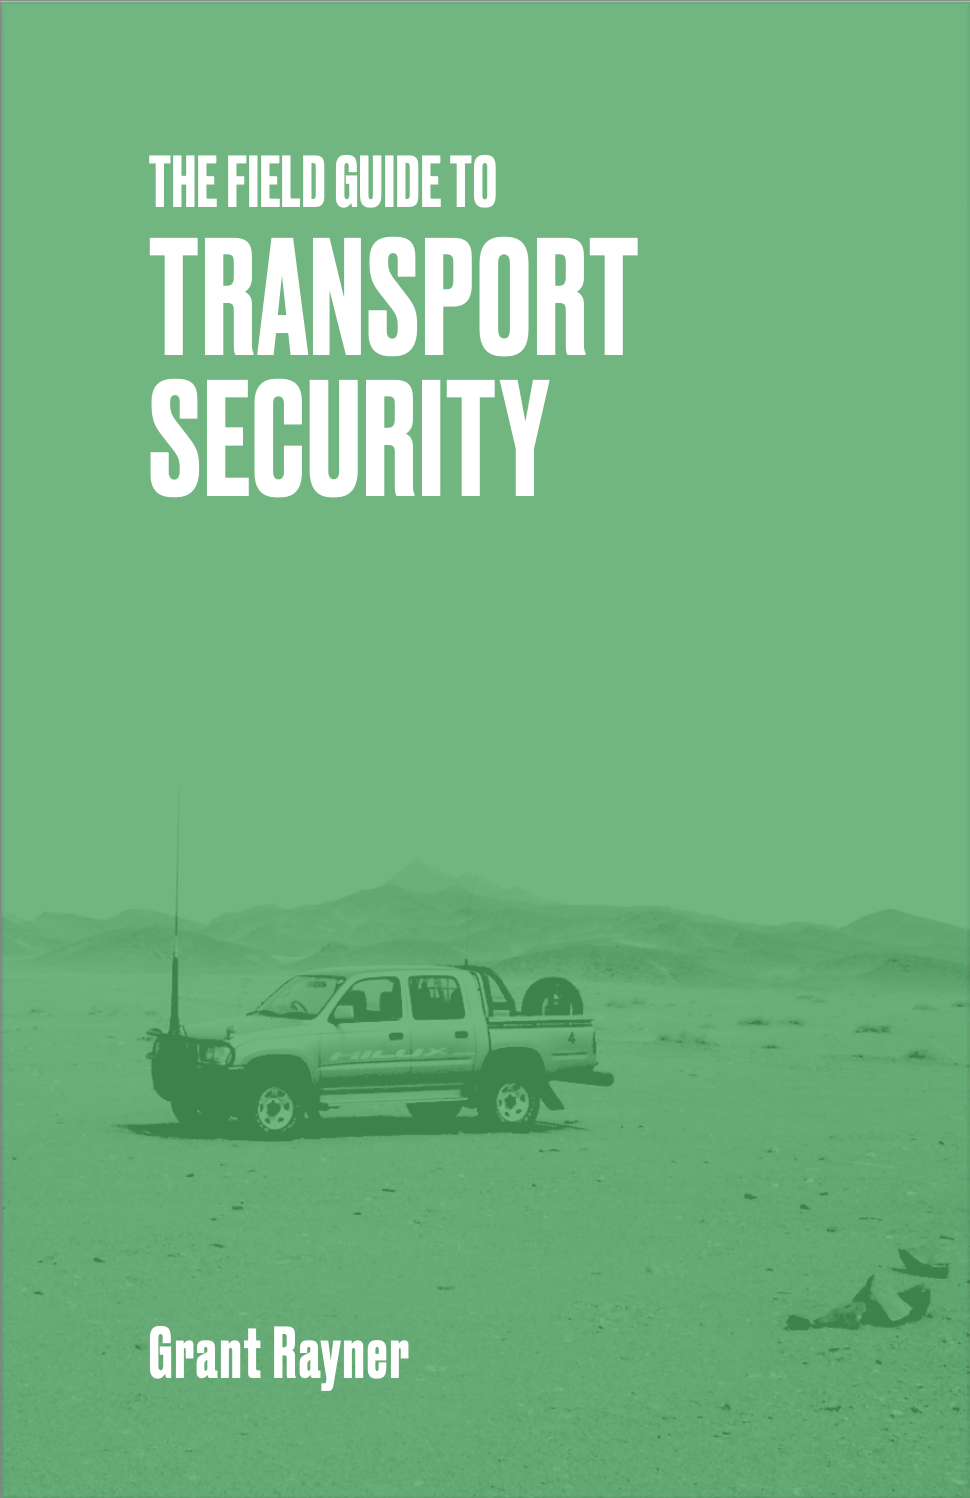 The Field Guide to Transport Security